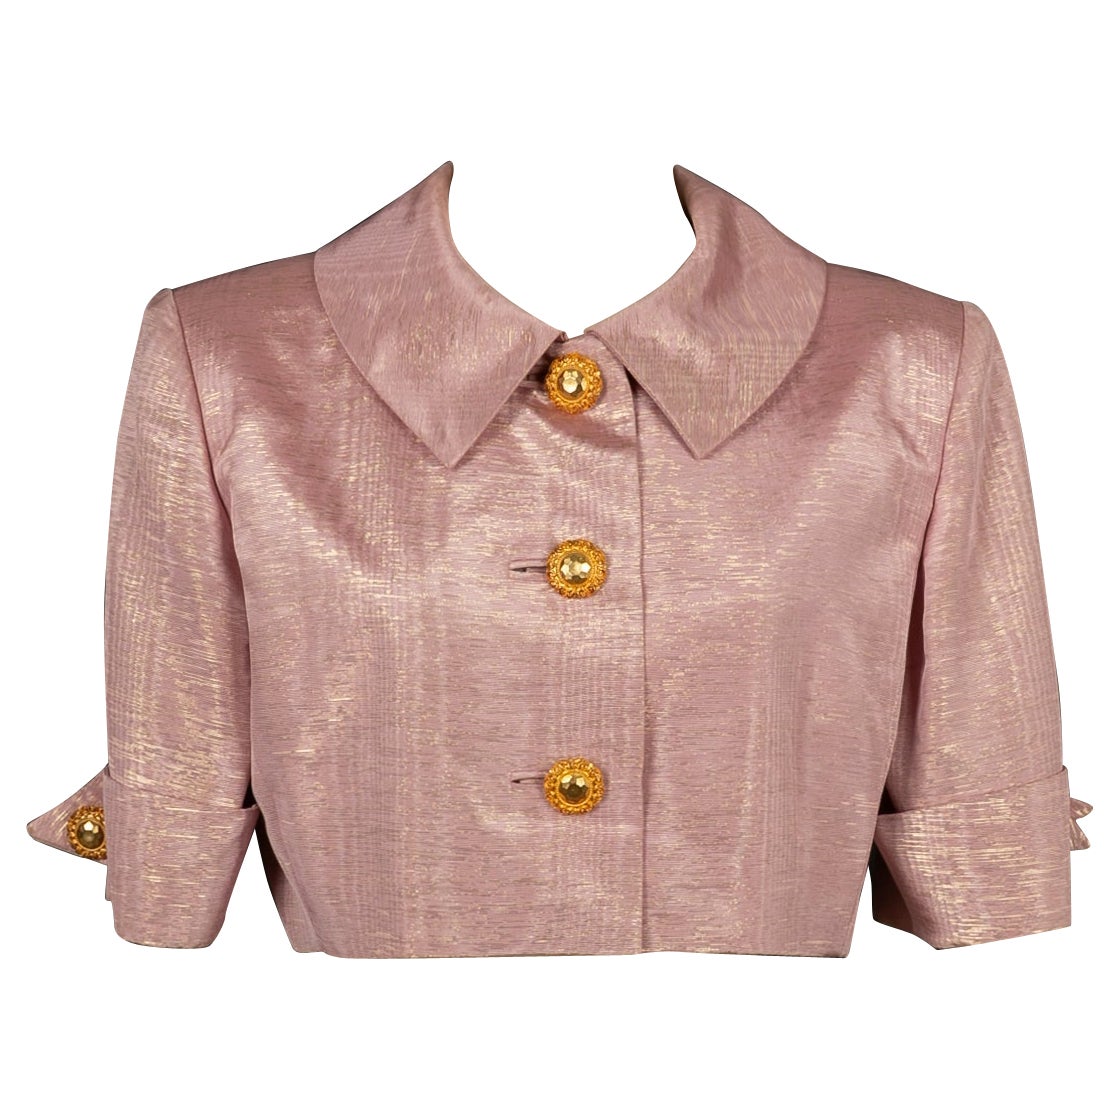 Nina Ricci Short Jacket in Pink Cotton and Golden Lame For Sale